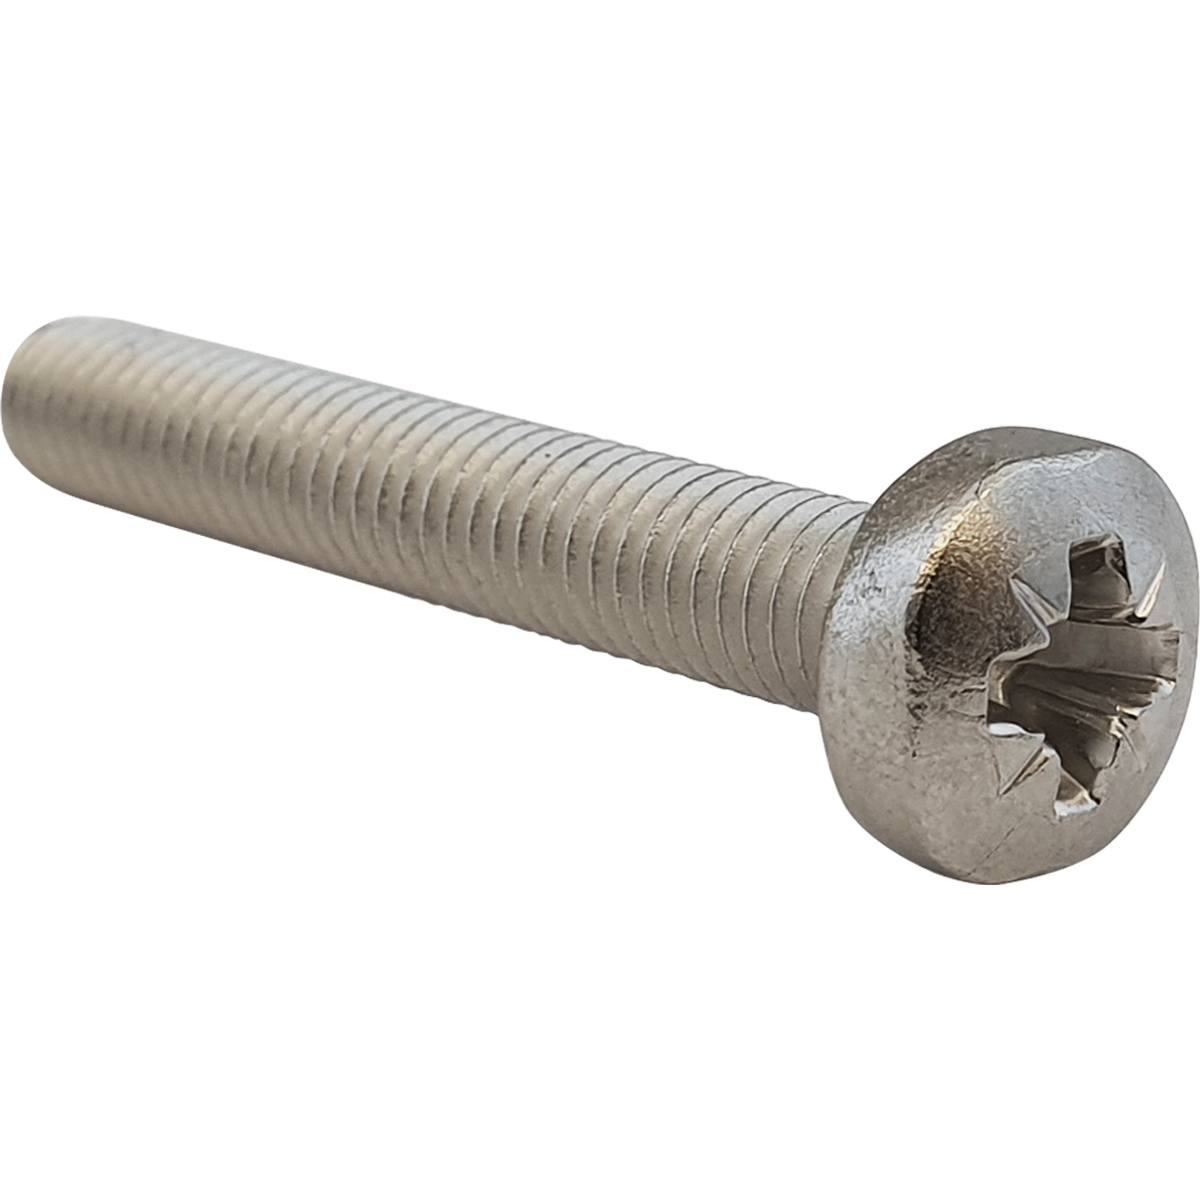 Corrosion resistant, A2 stainless steel Machine Screws with a Pozi recess and pan head